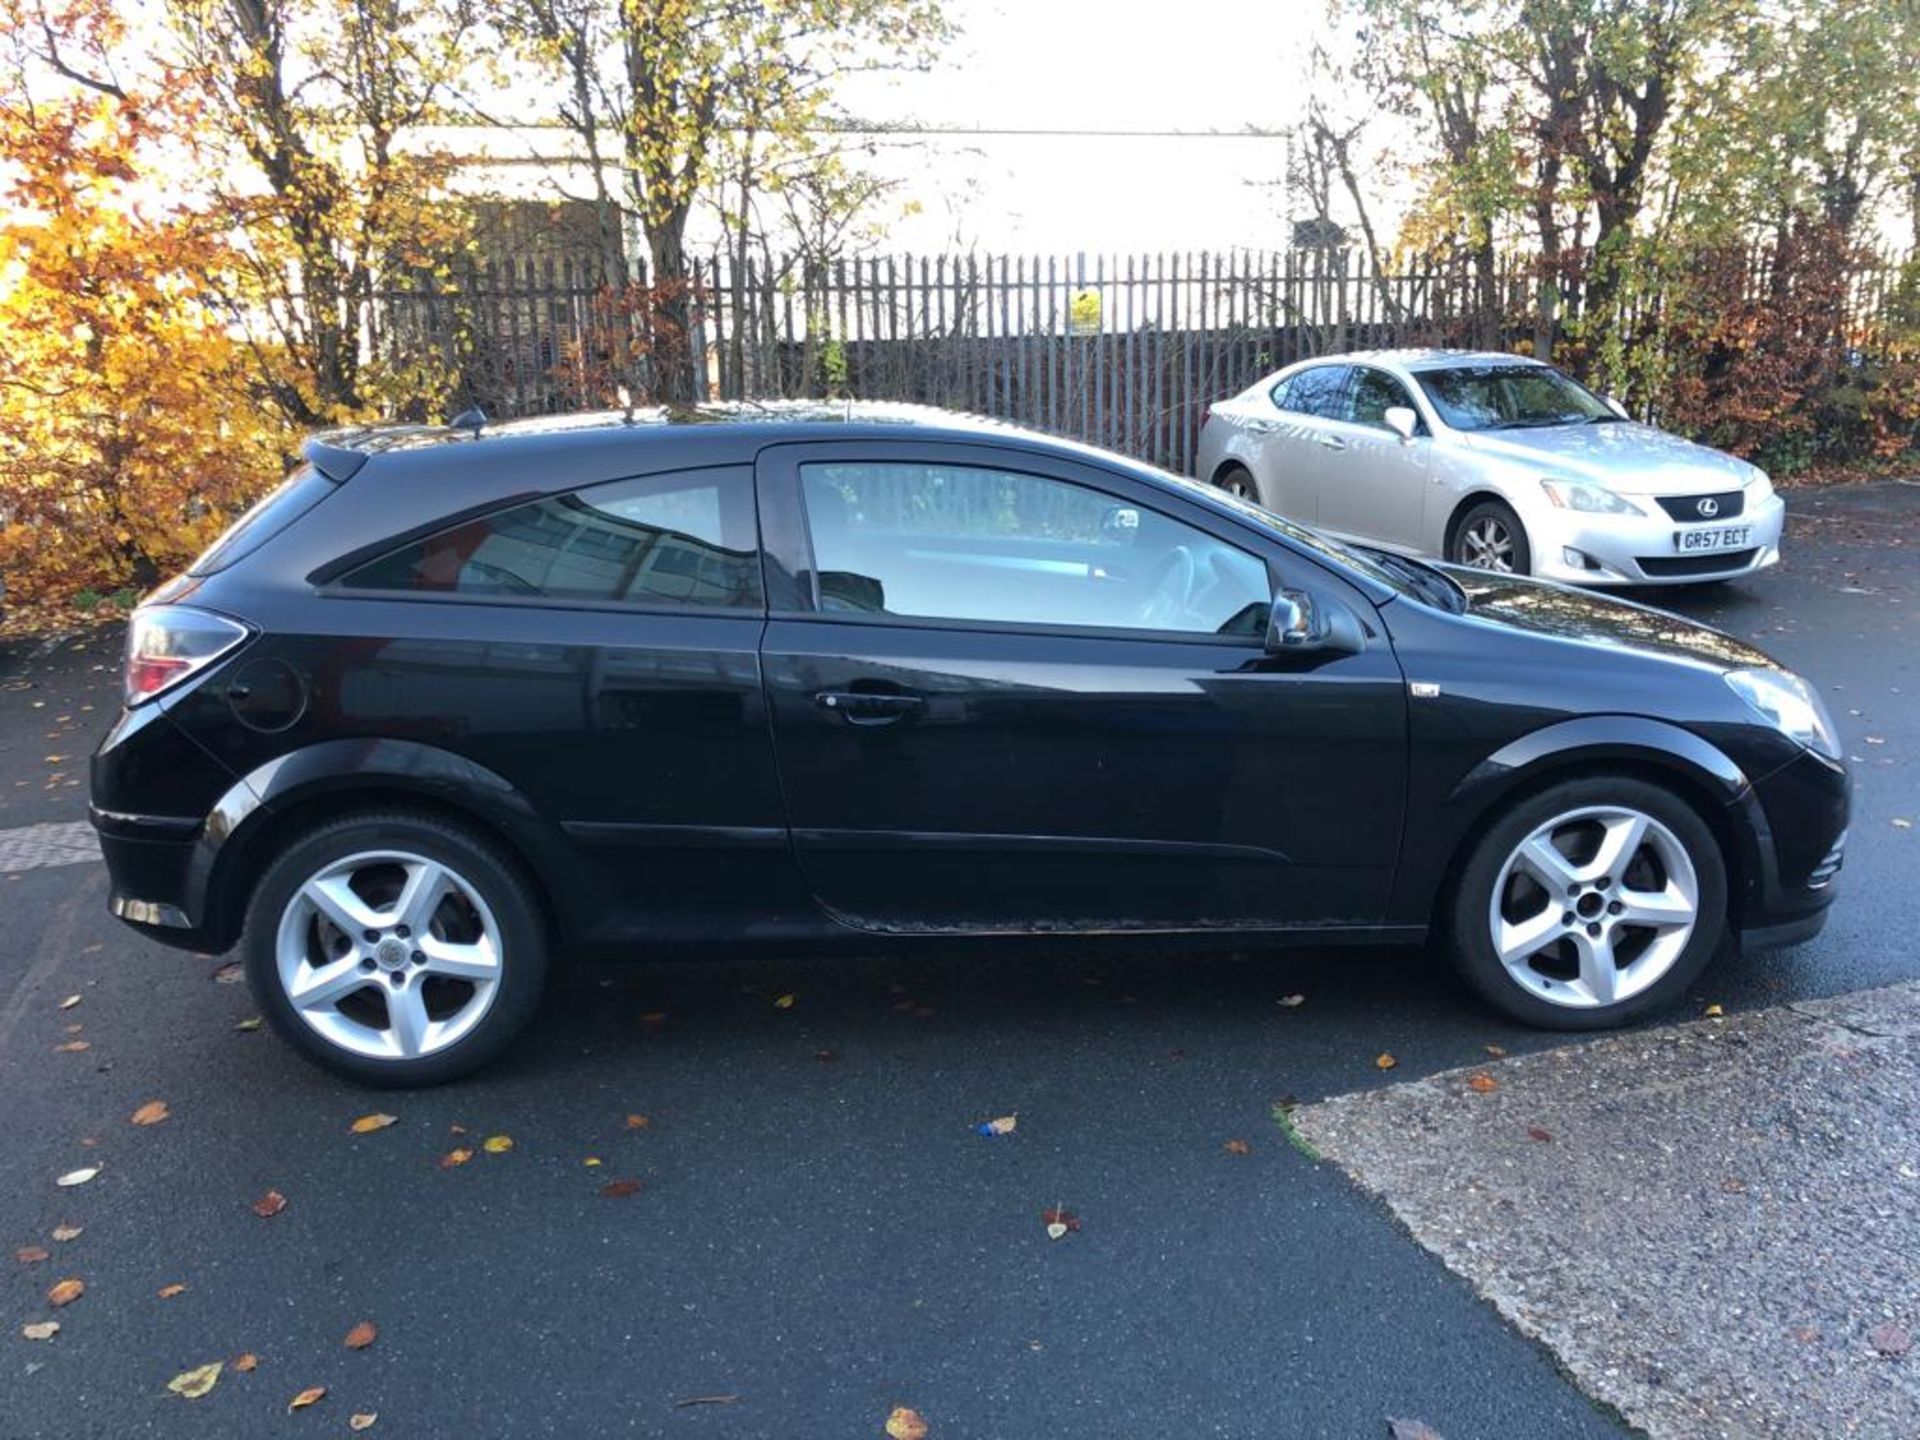 2008 Vauxhall Astra CDTI 3 Door Hatchback - 138,835 miles **RESERVE JUST REDUCED** - Image 8 of 15